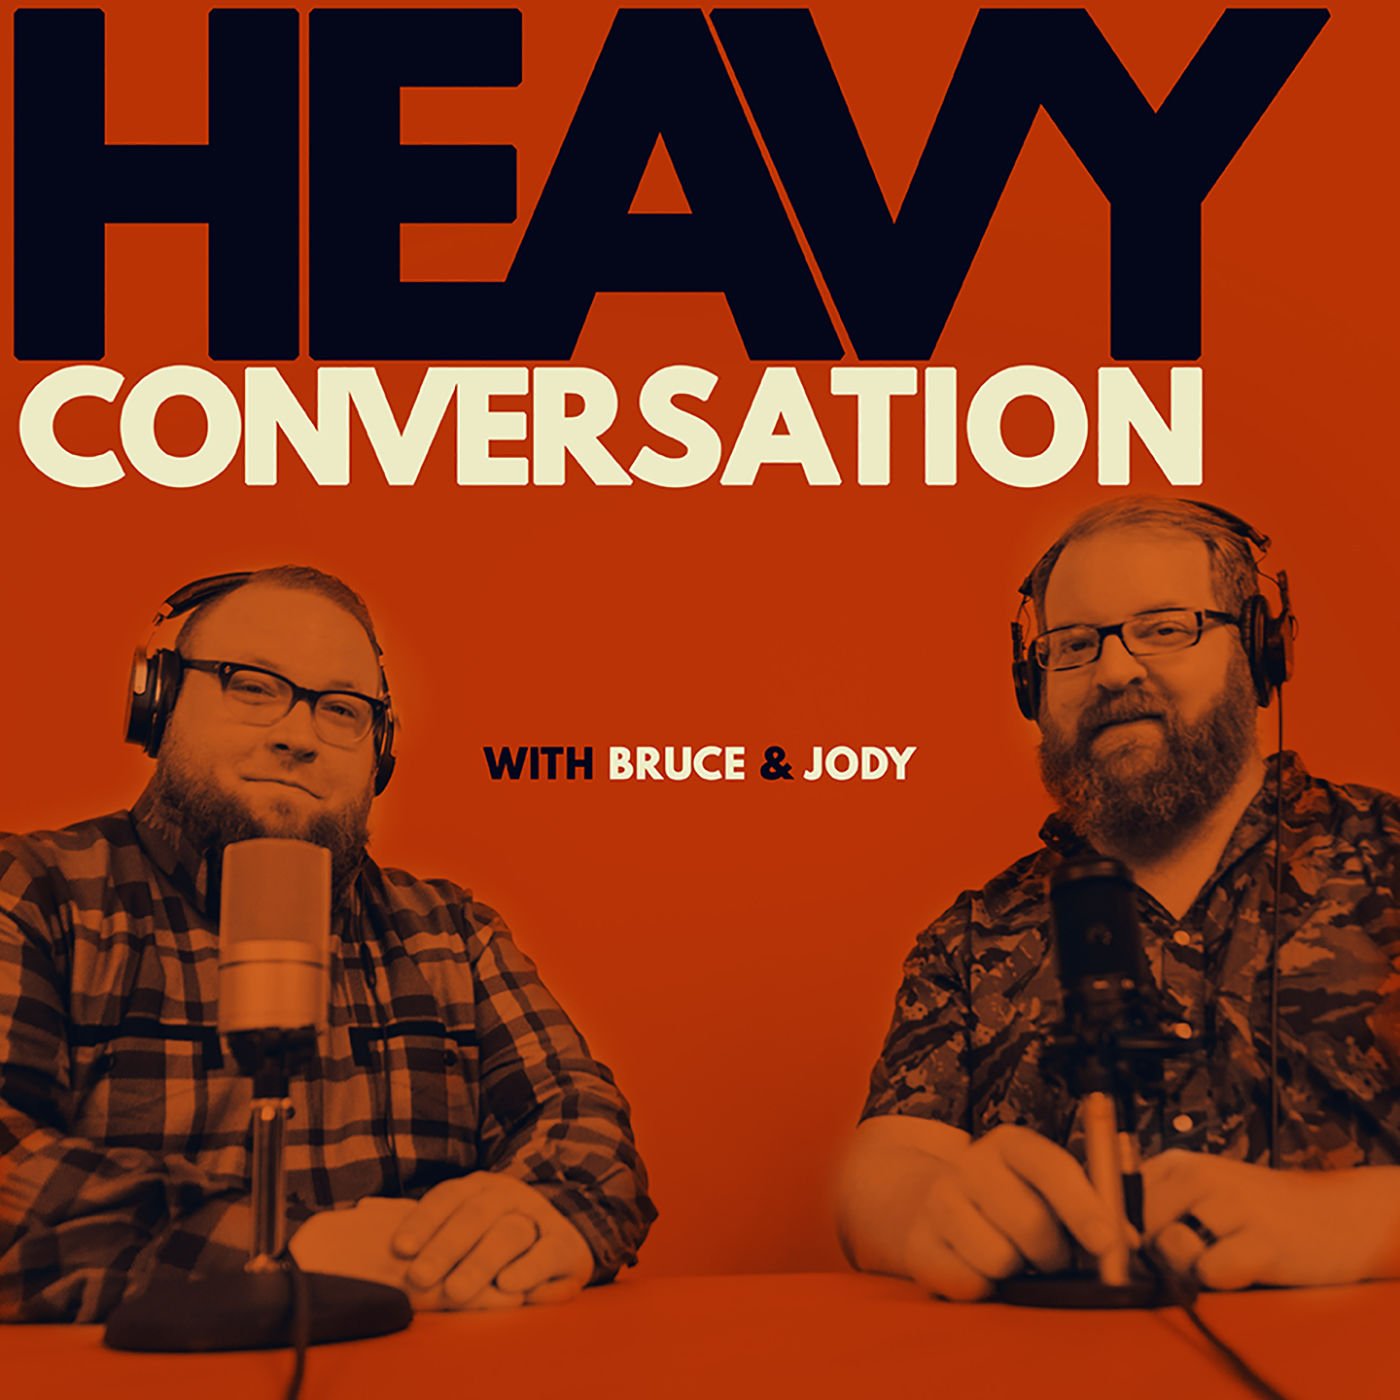 Heavy Conversation's Holiday Gift Guide 2021